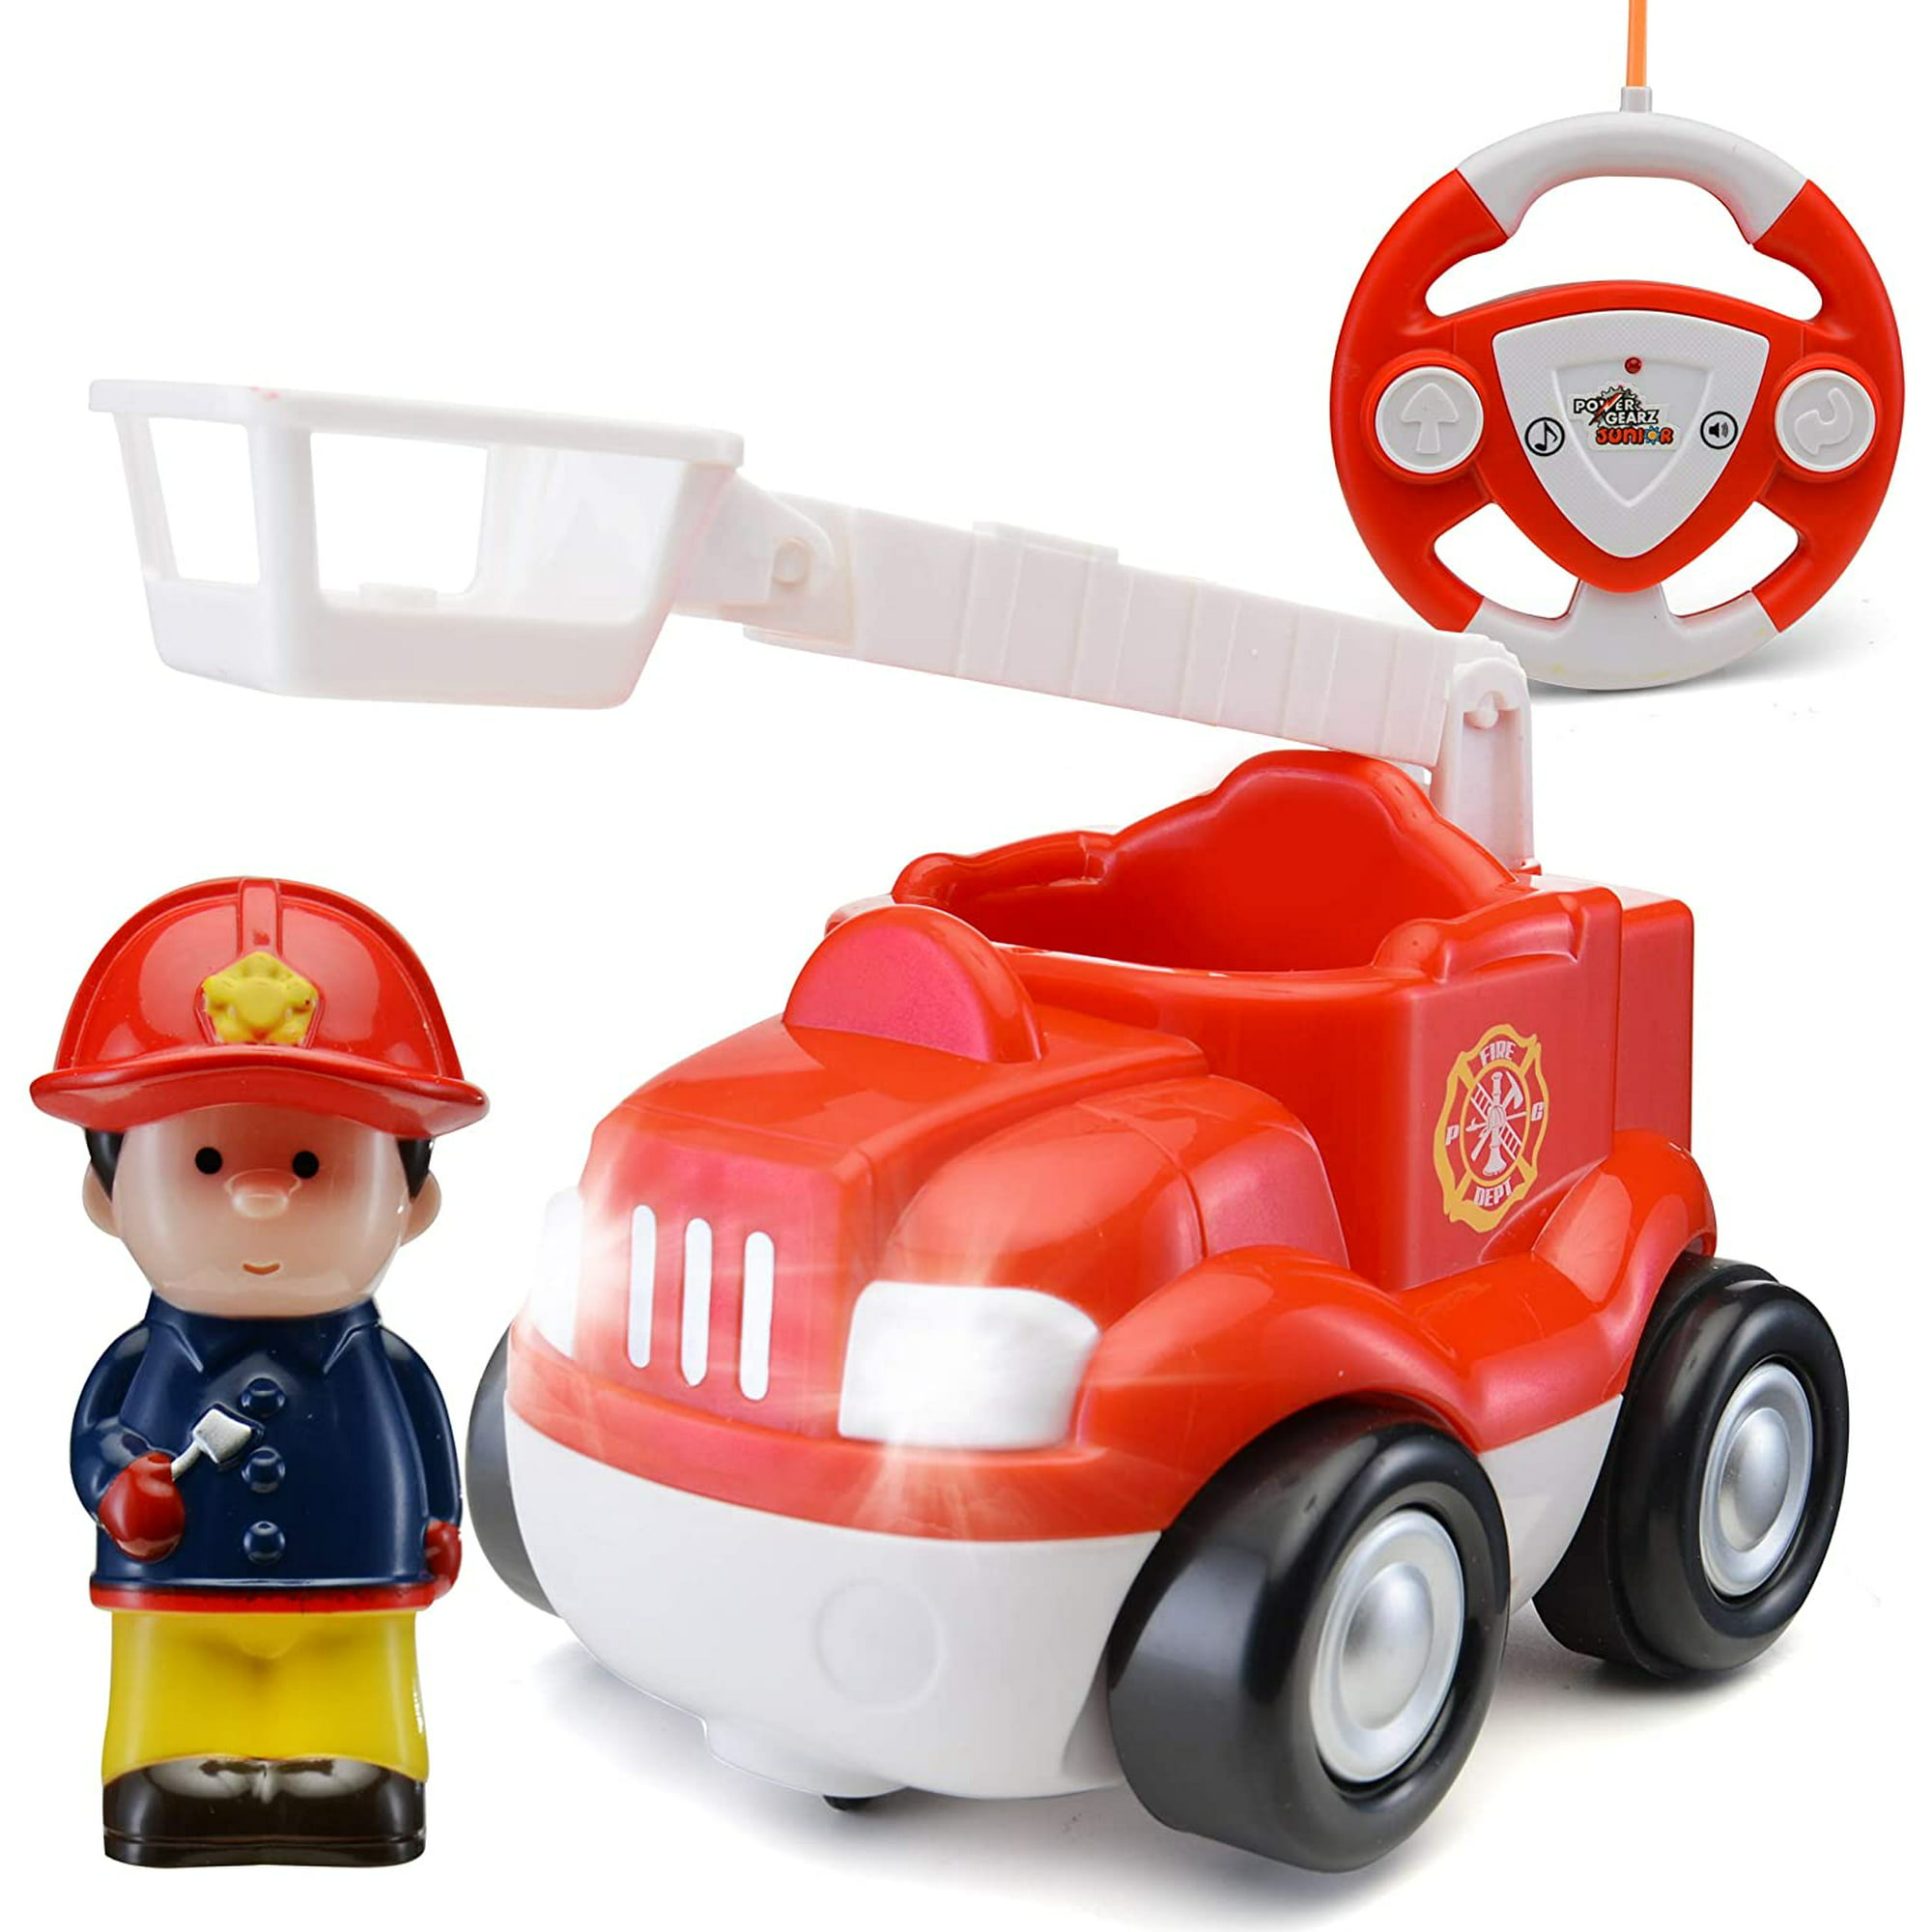 Power Gearz Jr. My First Cartoon RC Toddler Remote Control Car for Boys and  Girls, Remote Control Fire Truck Toy with Lights and Sound for Baby,  Toddlers (Red Fire Truck) Red Fire